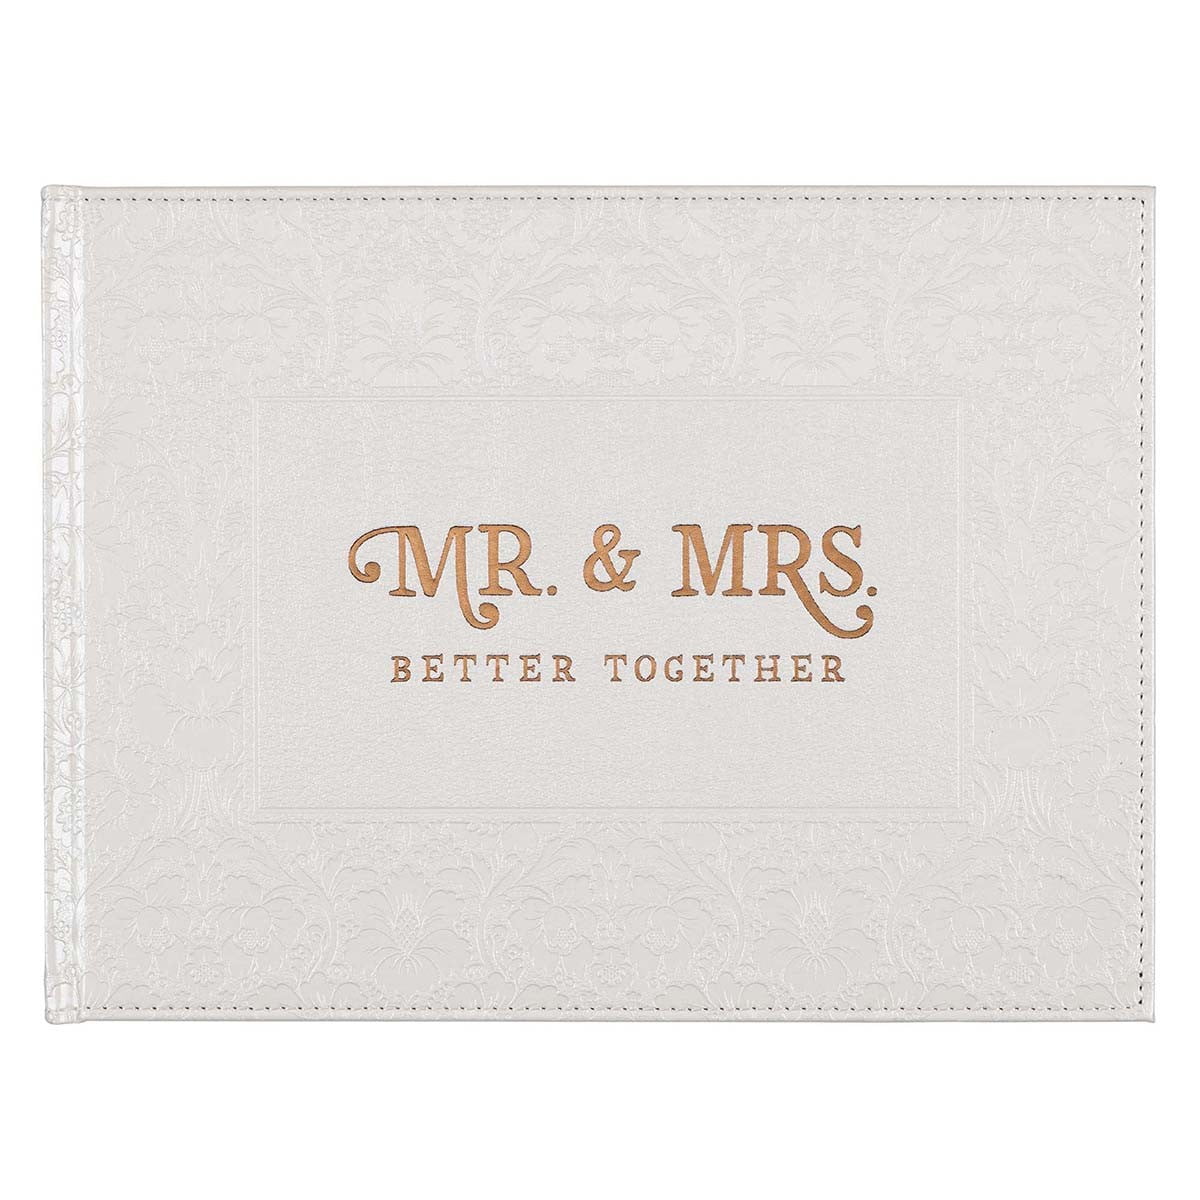 Wedding Guest Book  Mr. & Mrs. Better Together White Padded Hardcover w/Inspirational Quotes  Visitor Register Sign-in Book for Events - Walmart.com